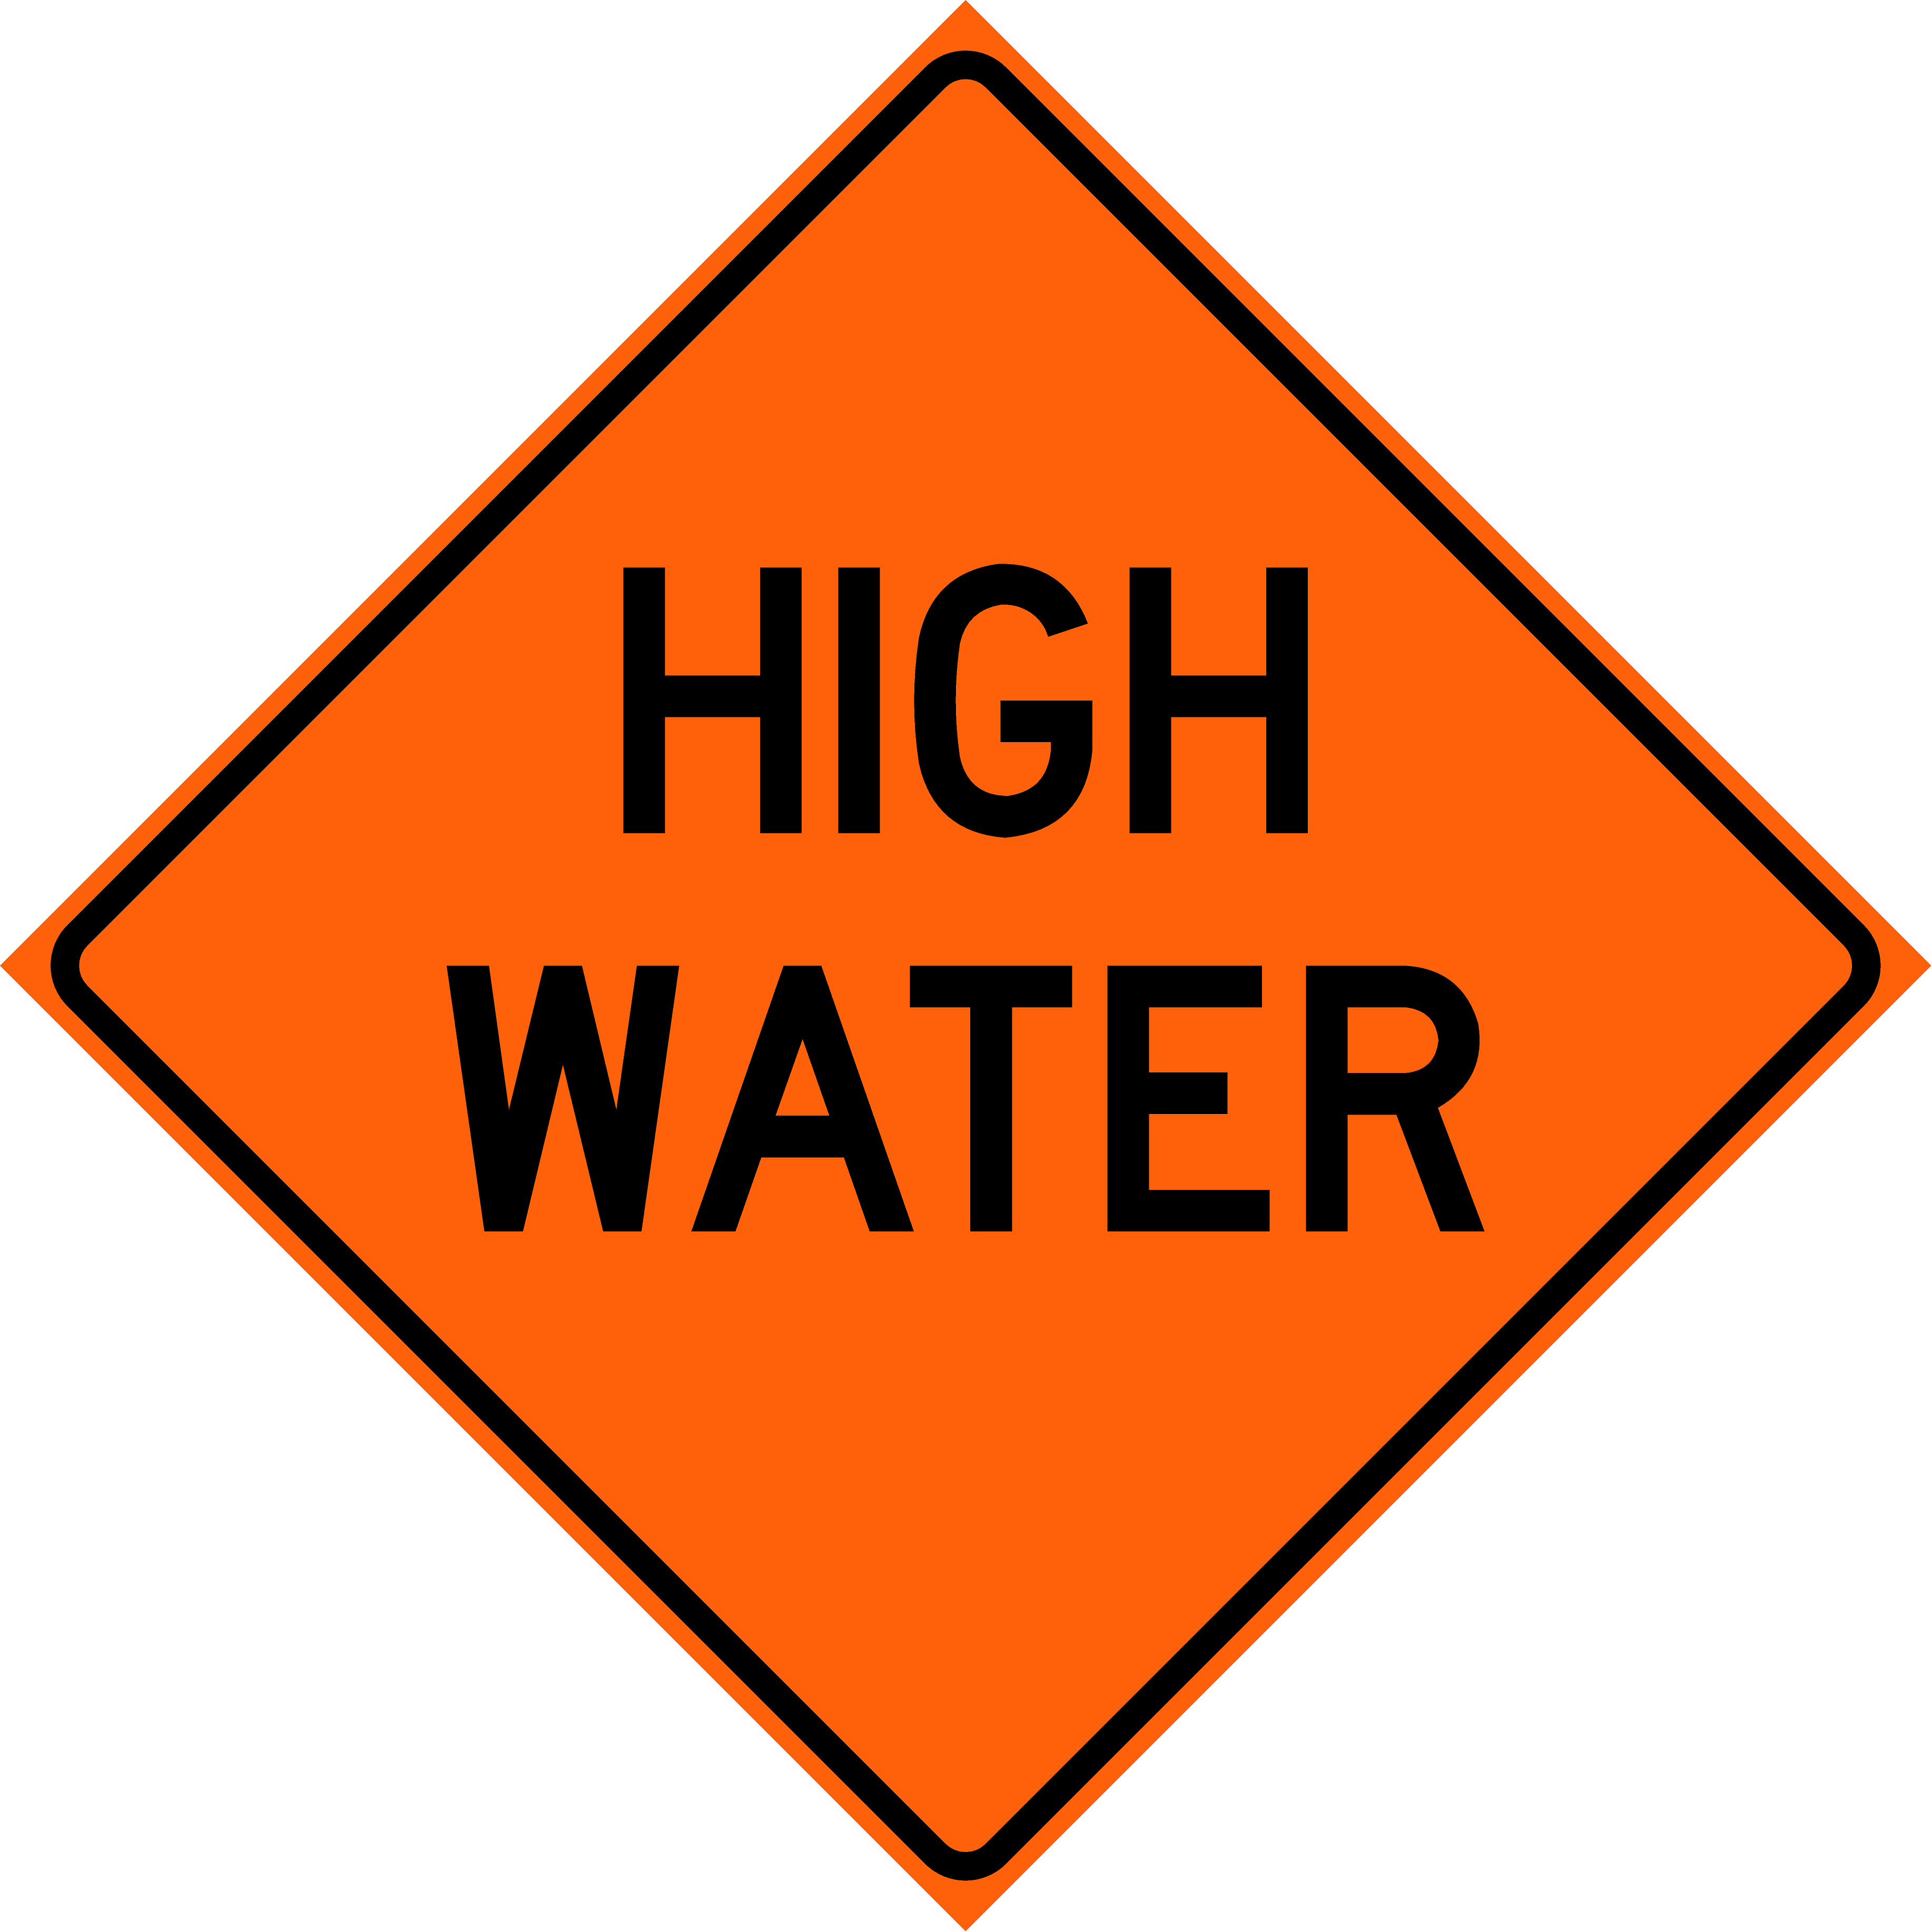 High Water (W8-H18a)